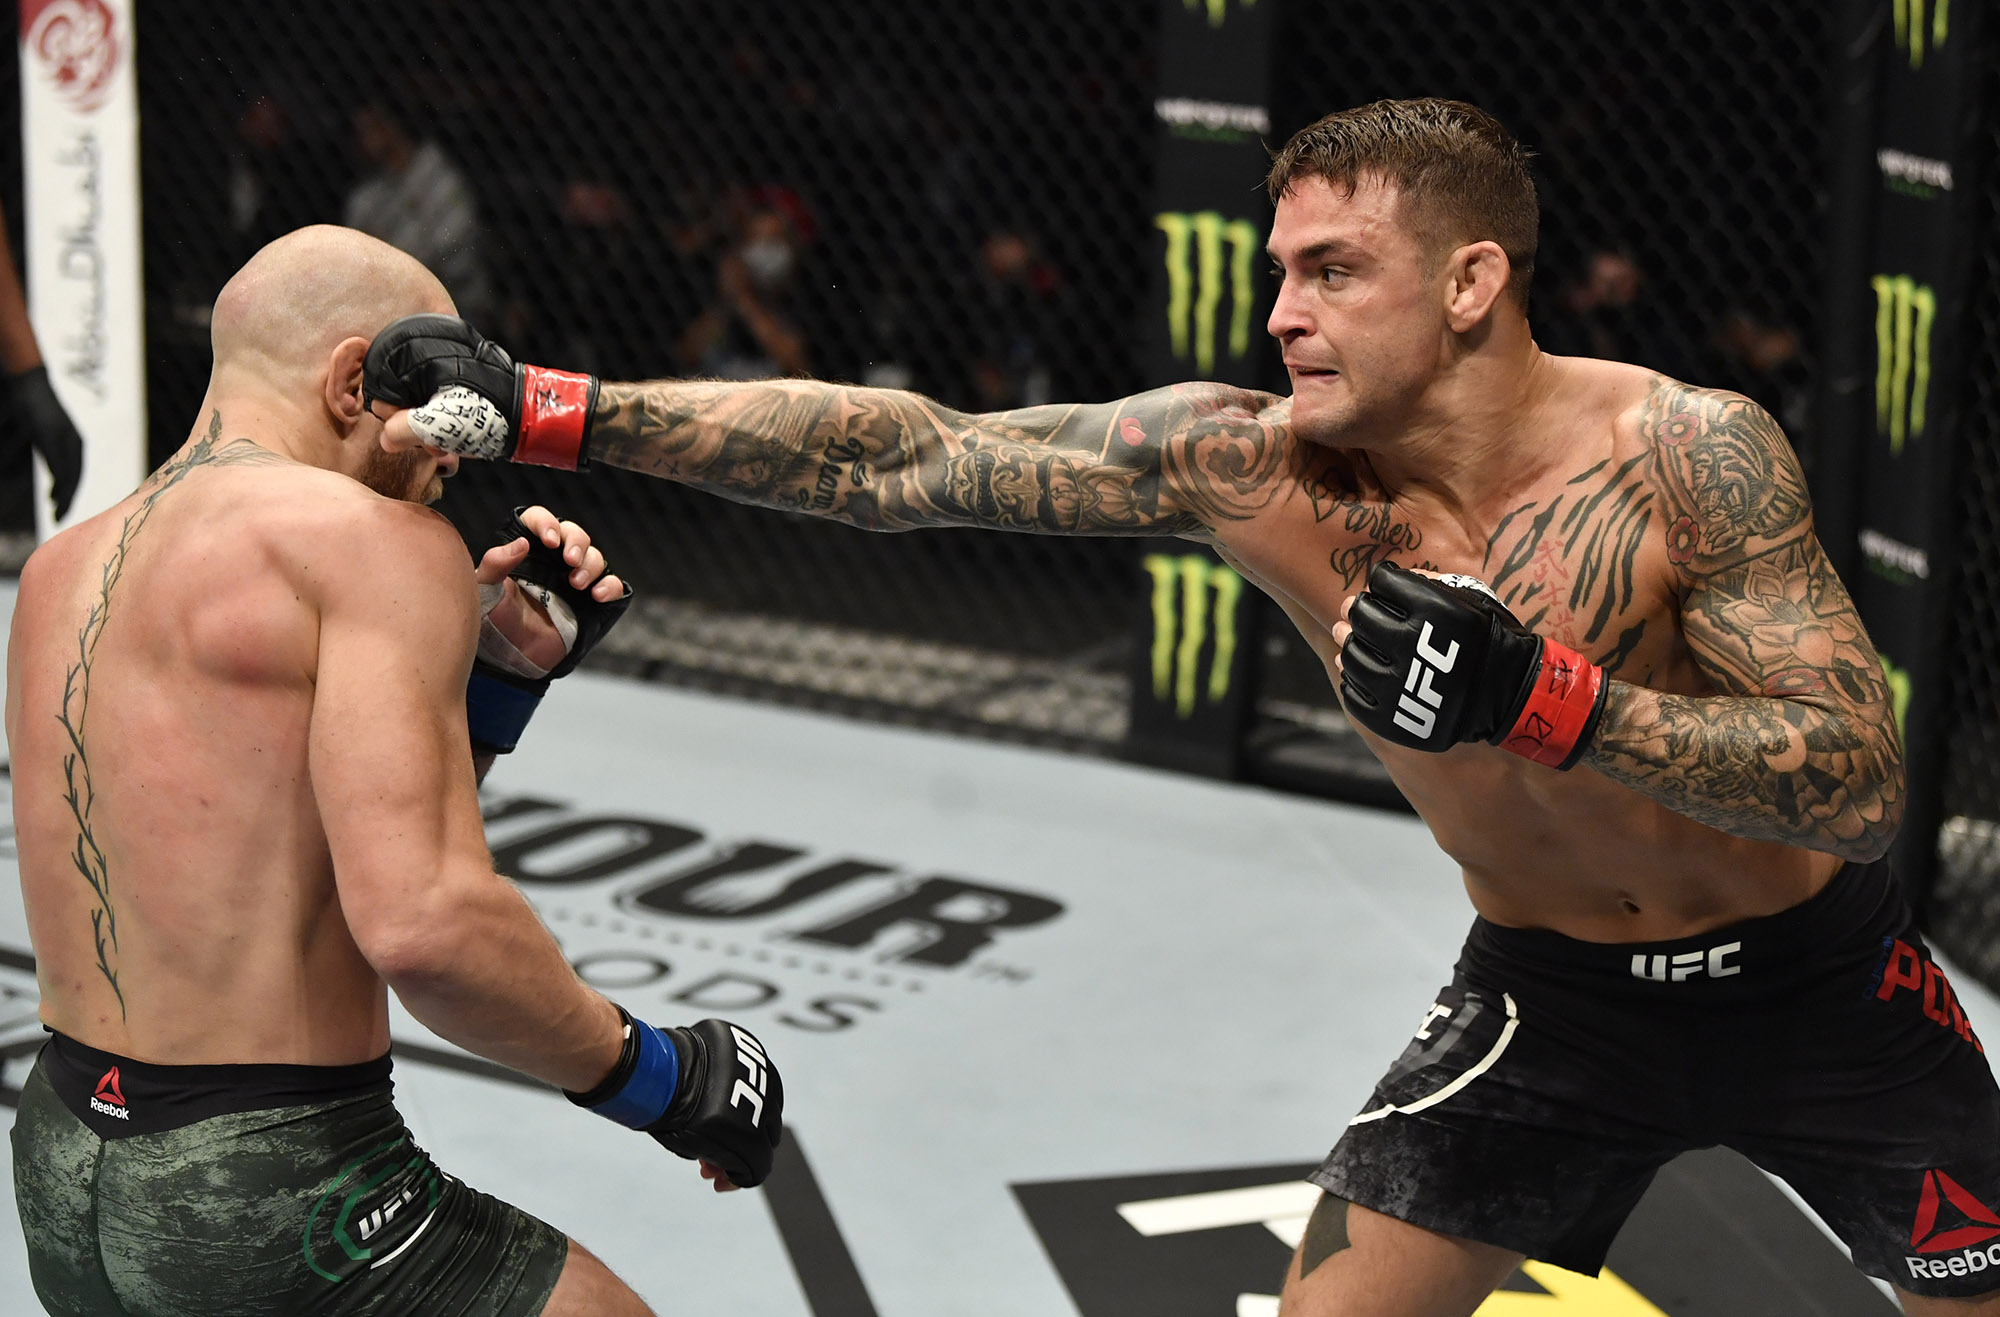 Dustin Poirier knocks out Conor McGregor in 2nd round at UFC 257